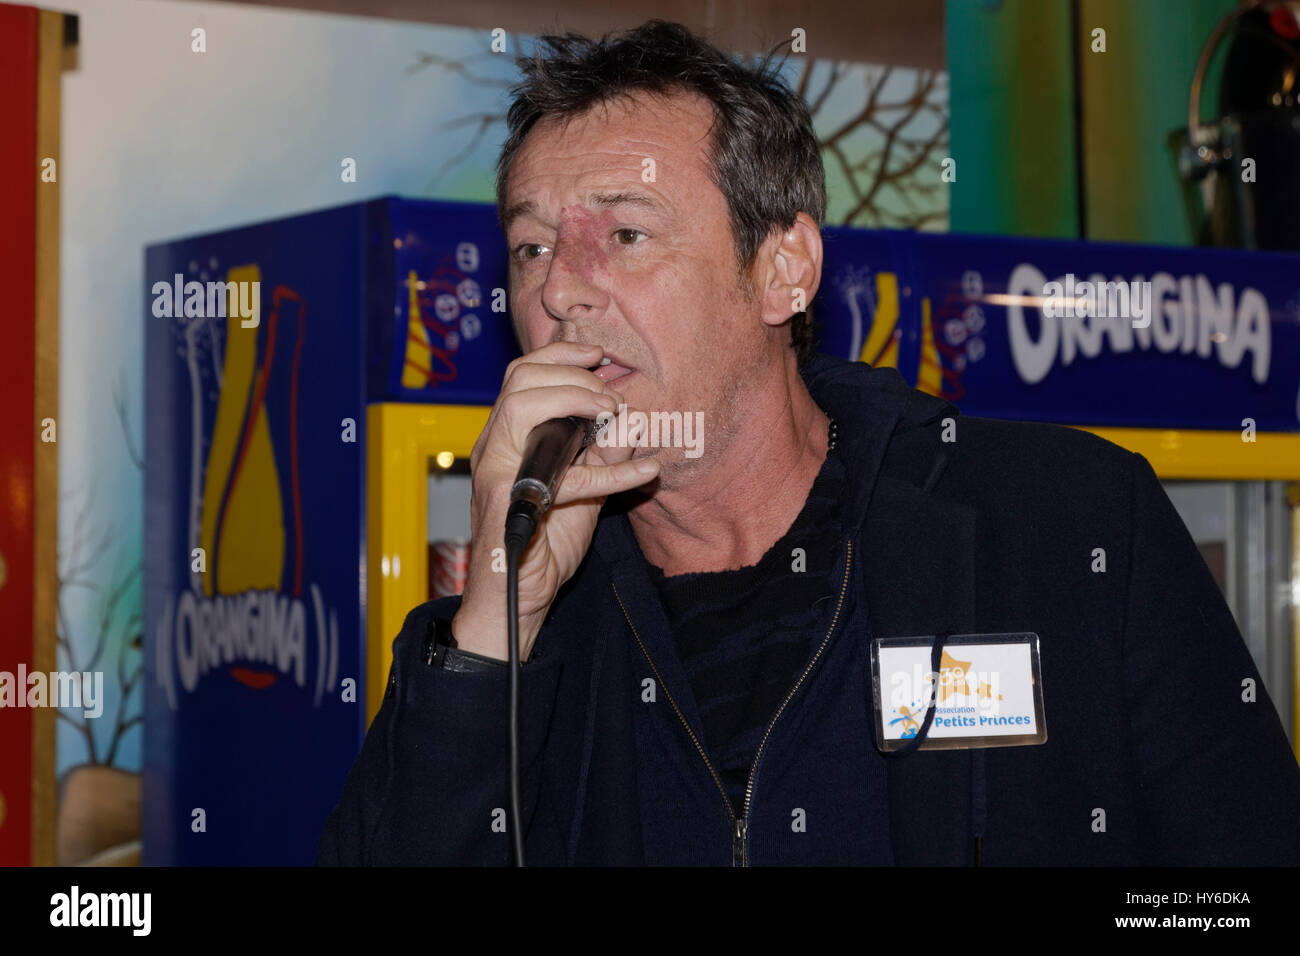 Paris,France.31th March,2017.Jean-Luc Reichmann sings at the Opening evening of the Throne Fair 2017 for the benefit of the Association Petits Princes Stock Photo